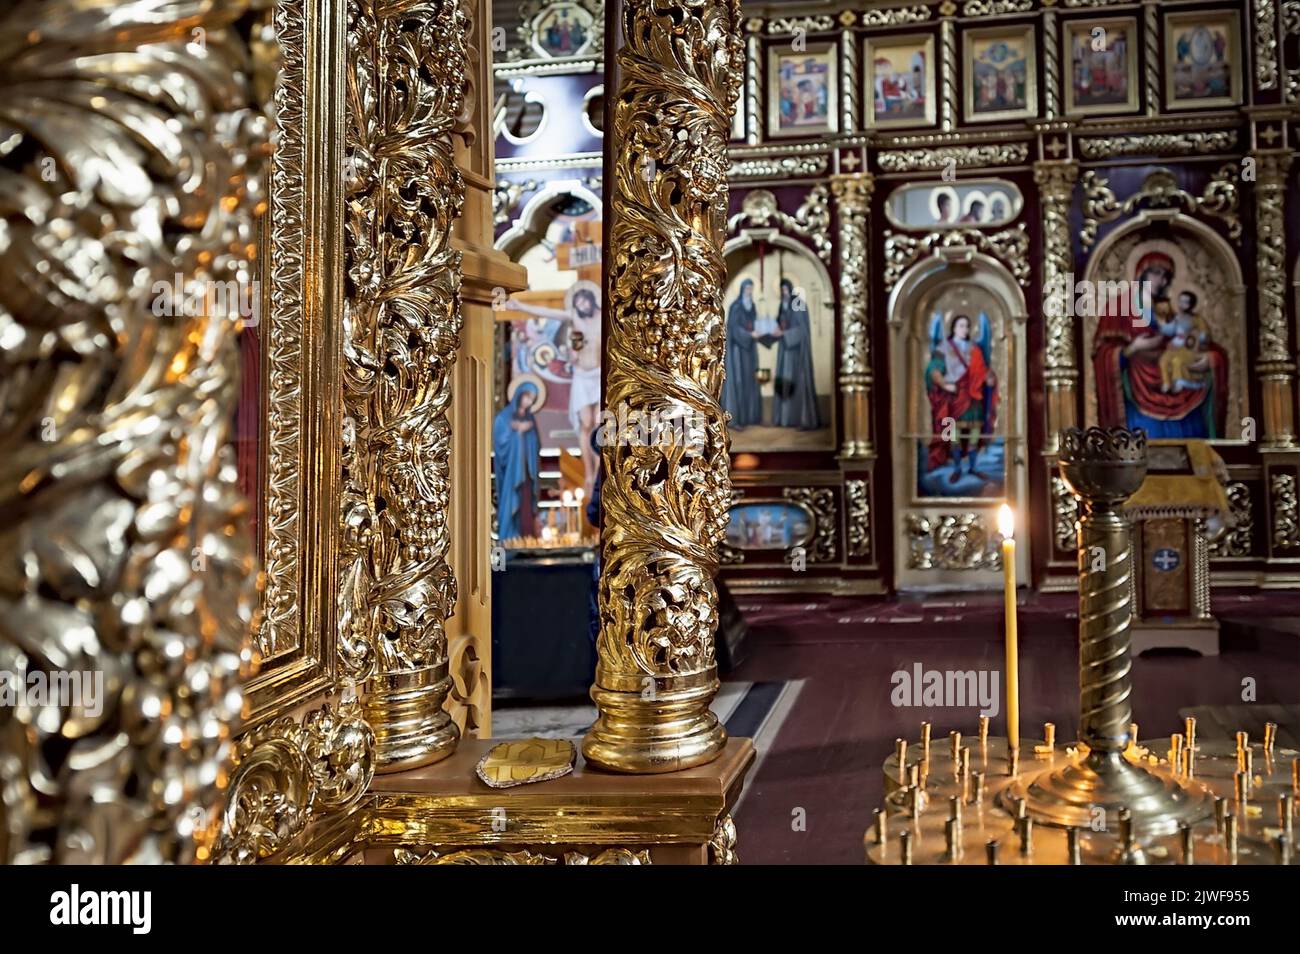 Golden interiors of Manyava Skete of the Exaltation of the Holy Cross, known as Ukrainian Athos in Carpathians of western Ukraine Stock Photo